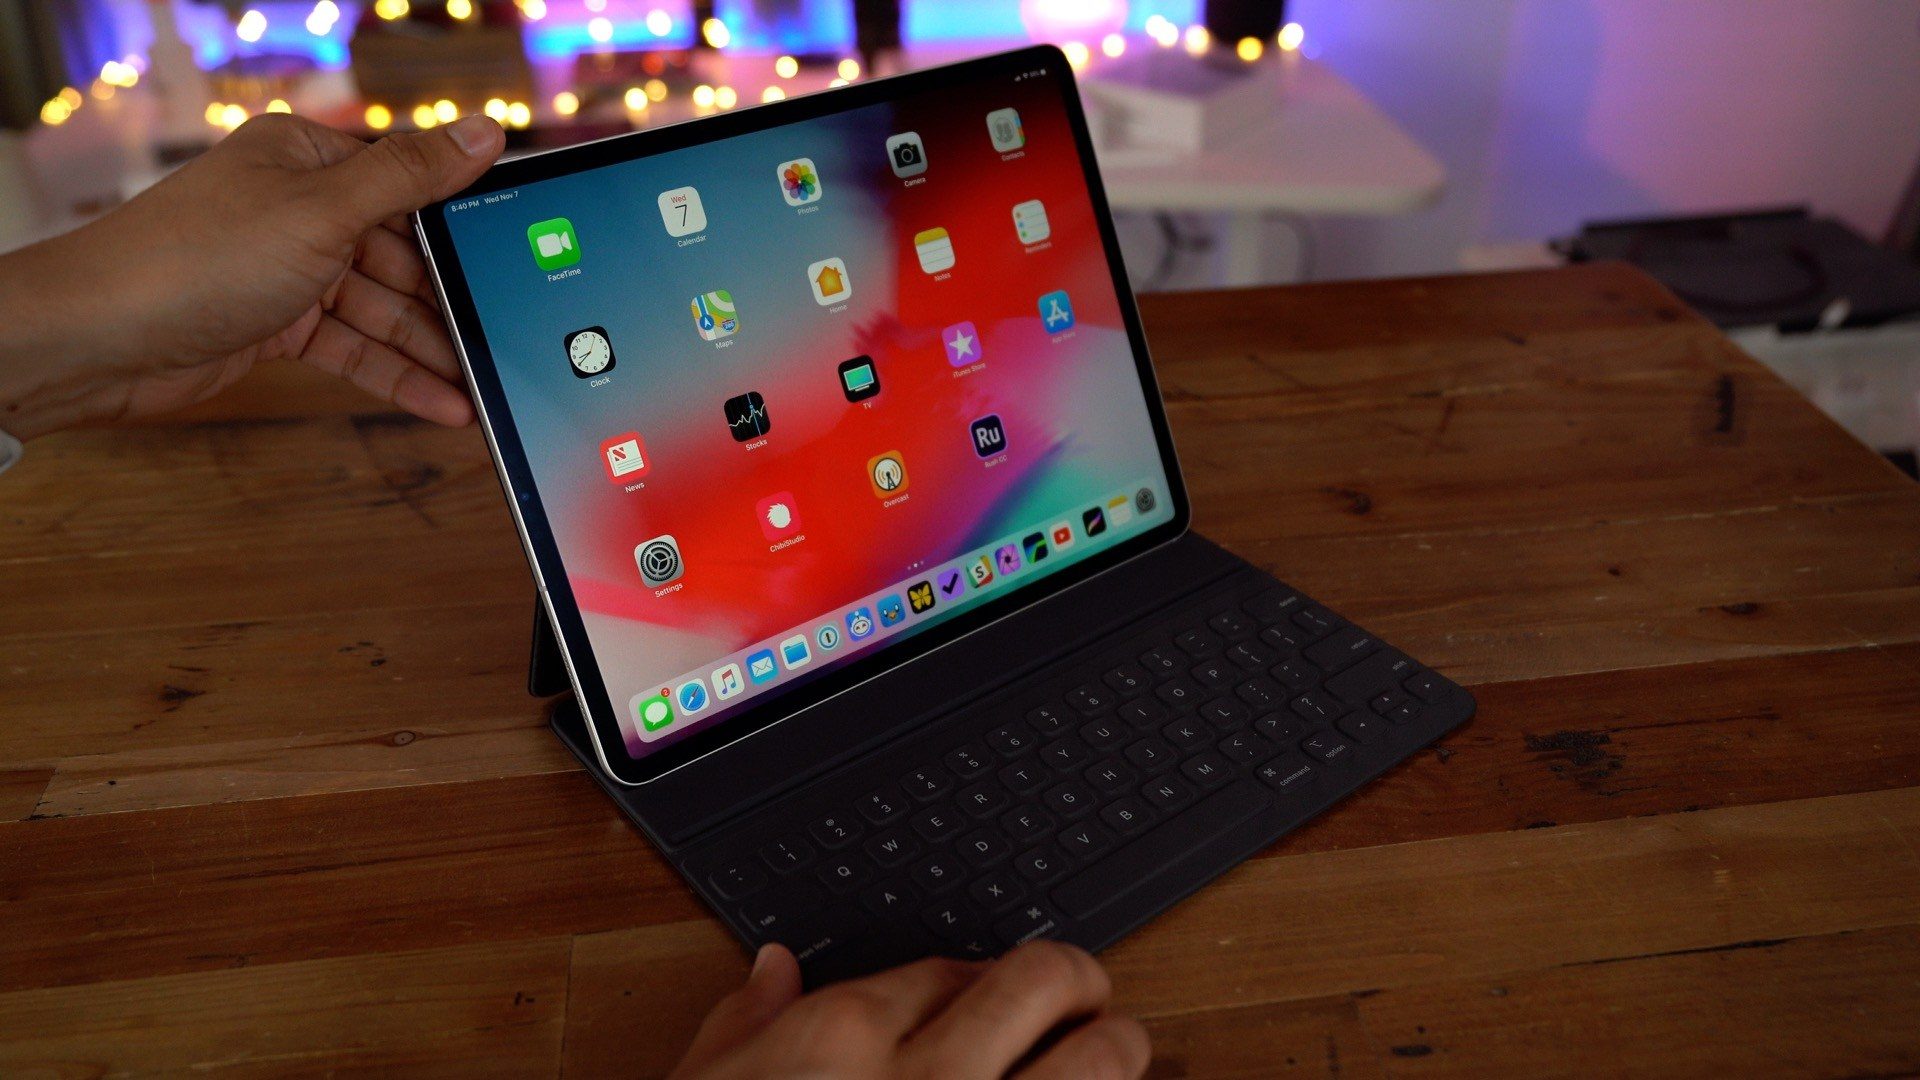 Apple's Working on a Smart Keyboard With Trackpad for the iPad